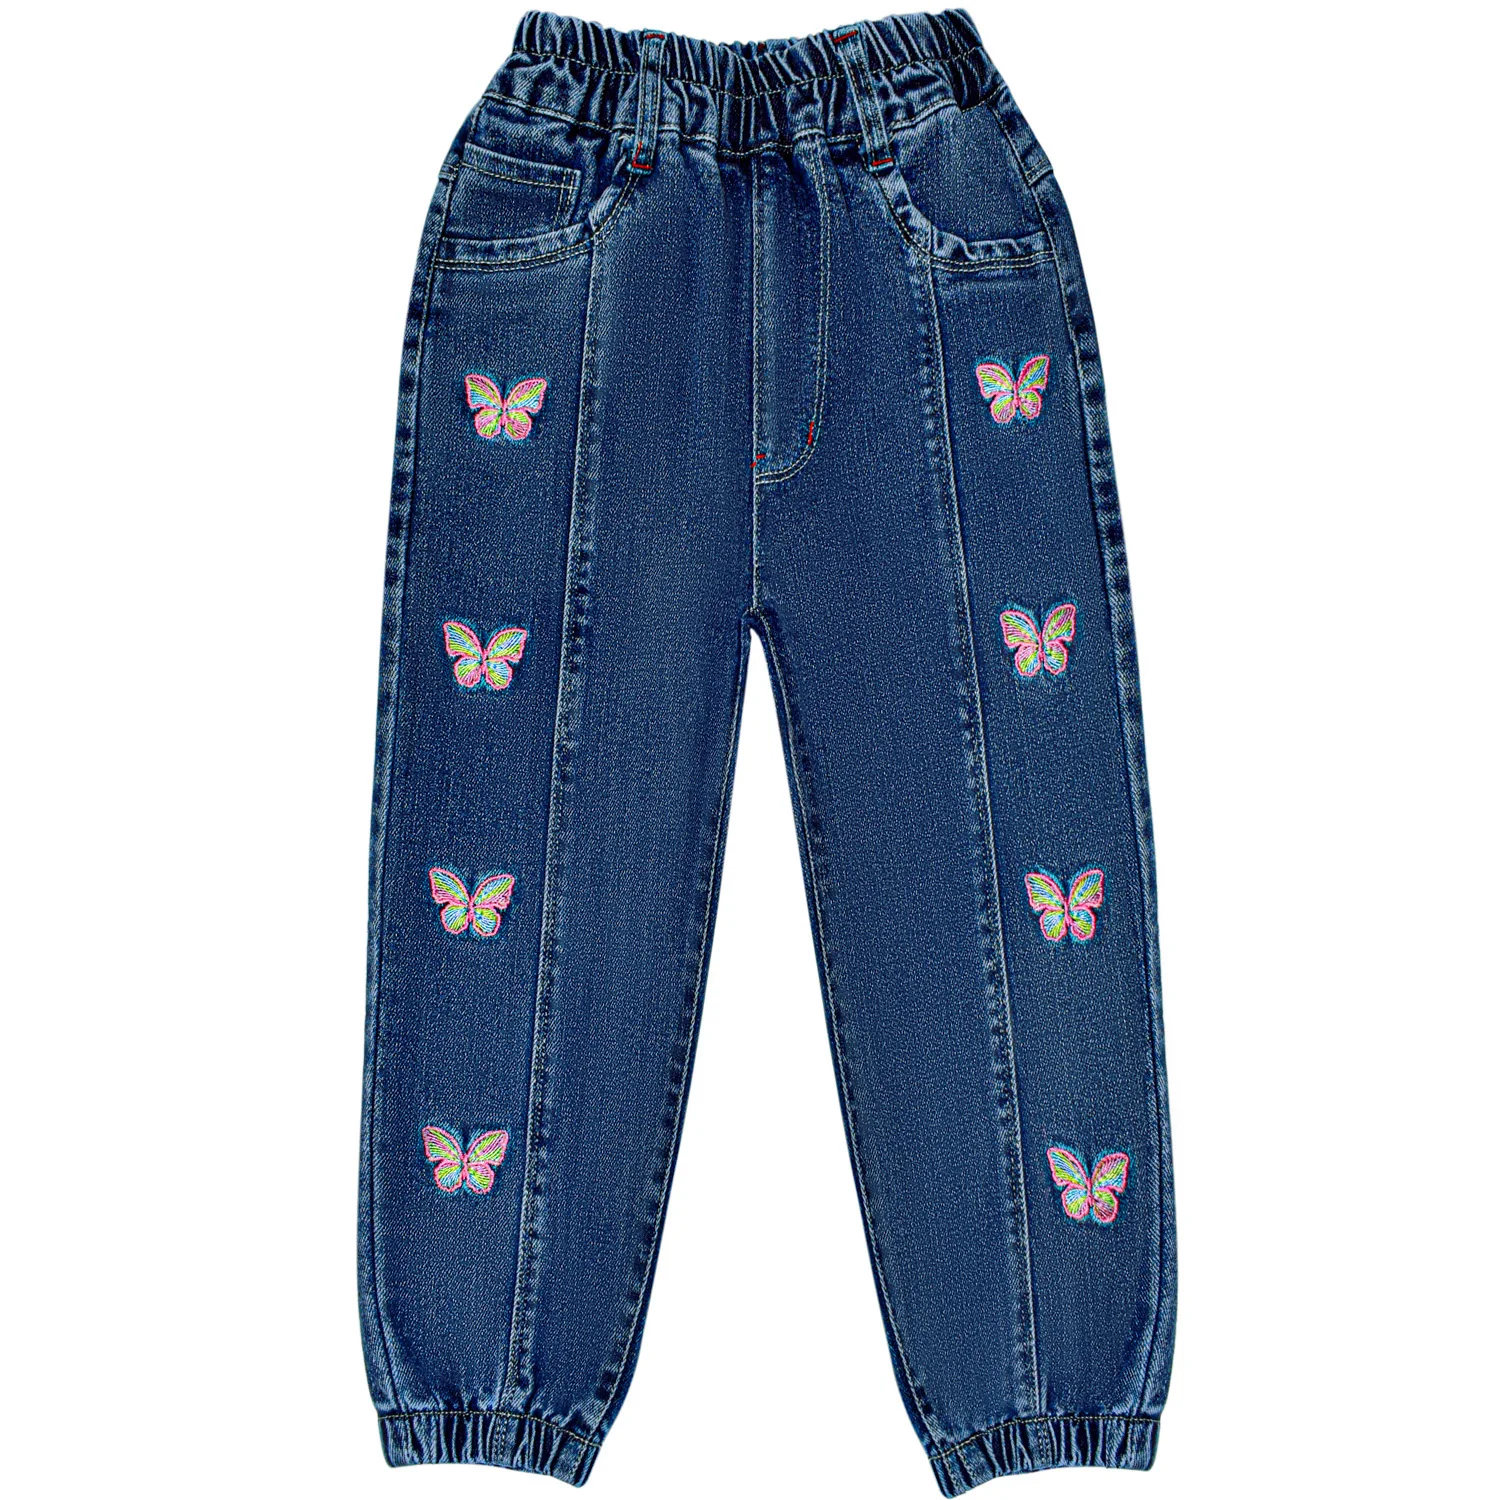 

Children's Jeans Toddler Girls Embroidered Denim Trousers Baby Girls Cowboy Pants Children Clothing